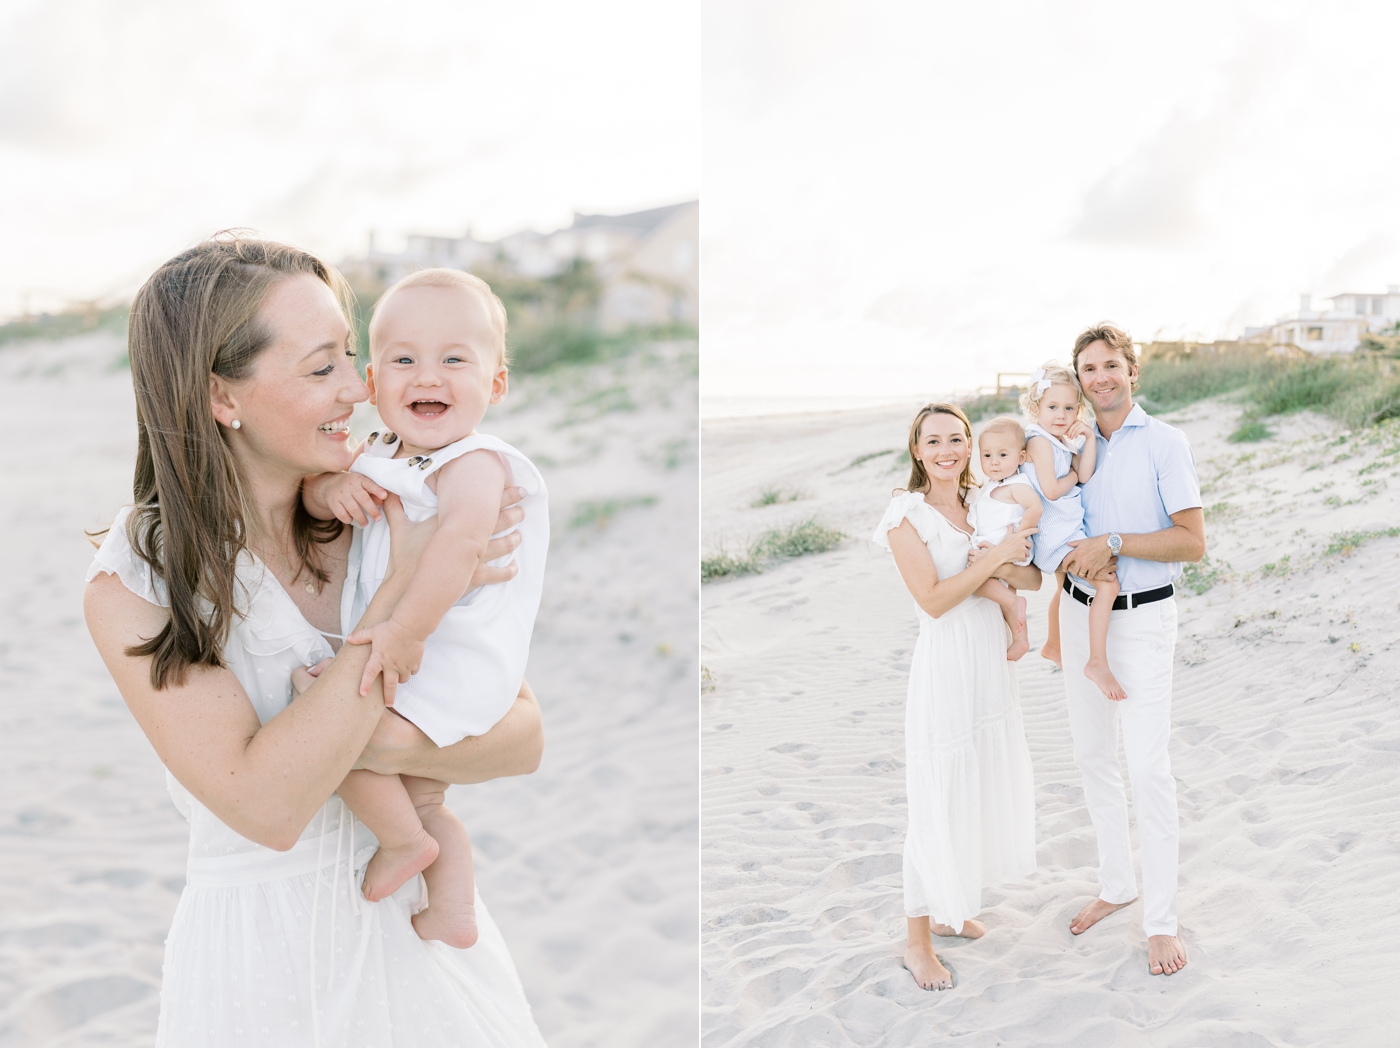 Family smiling on the beach during their Isle of Palms Family Session | Photo by Caitlyn Motycka Photography.